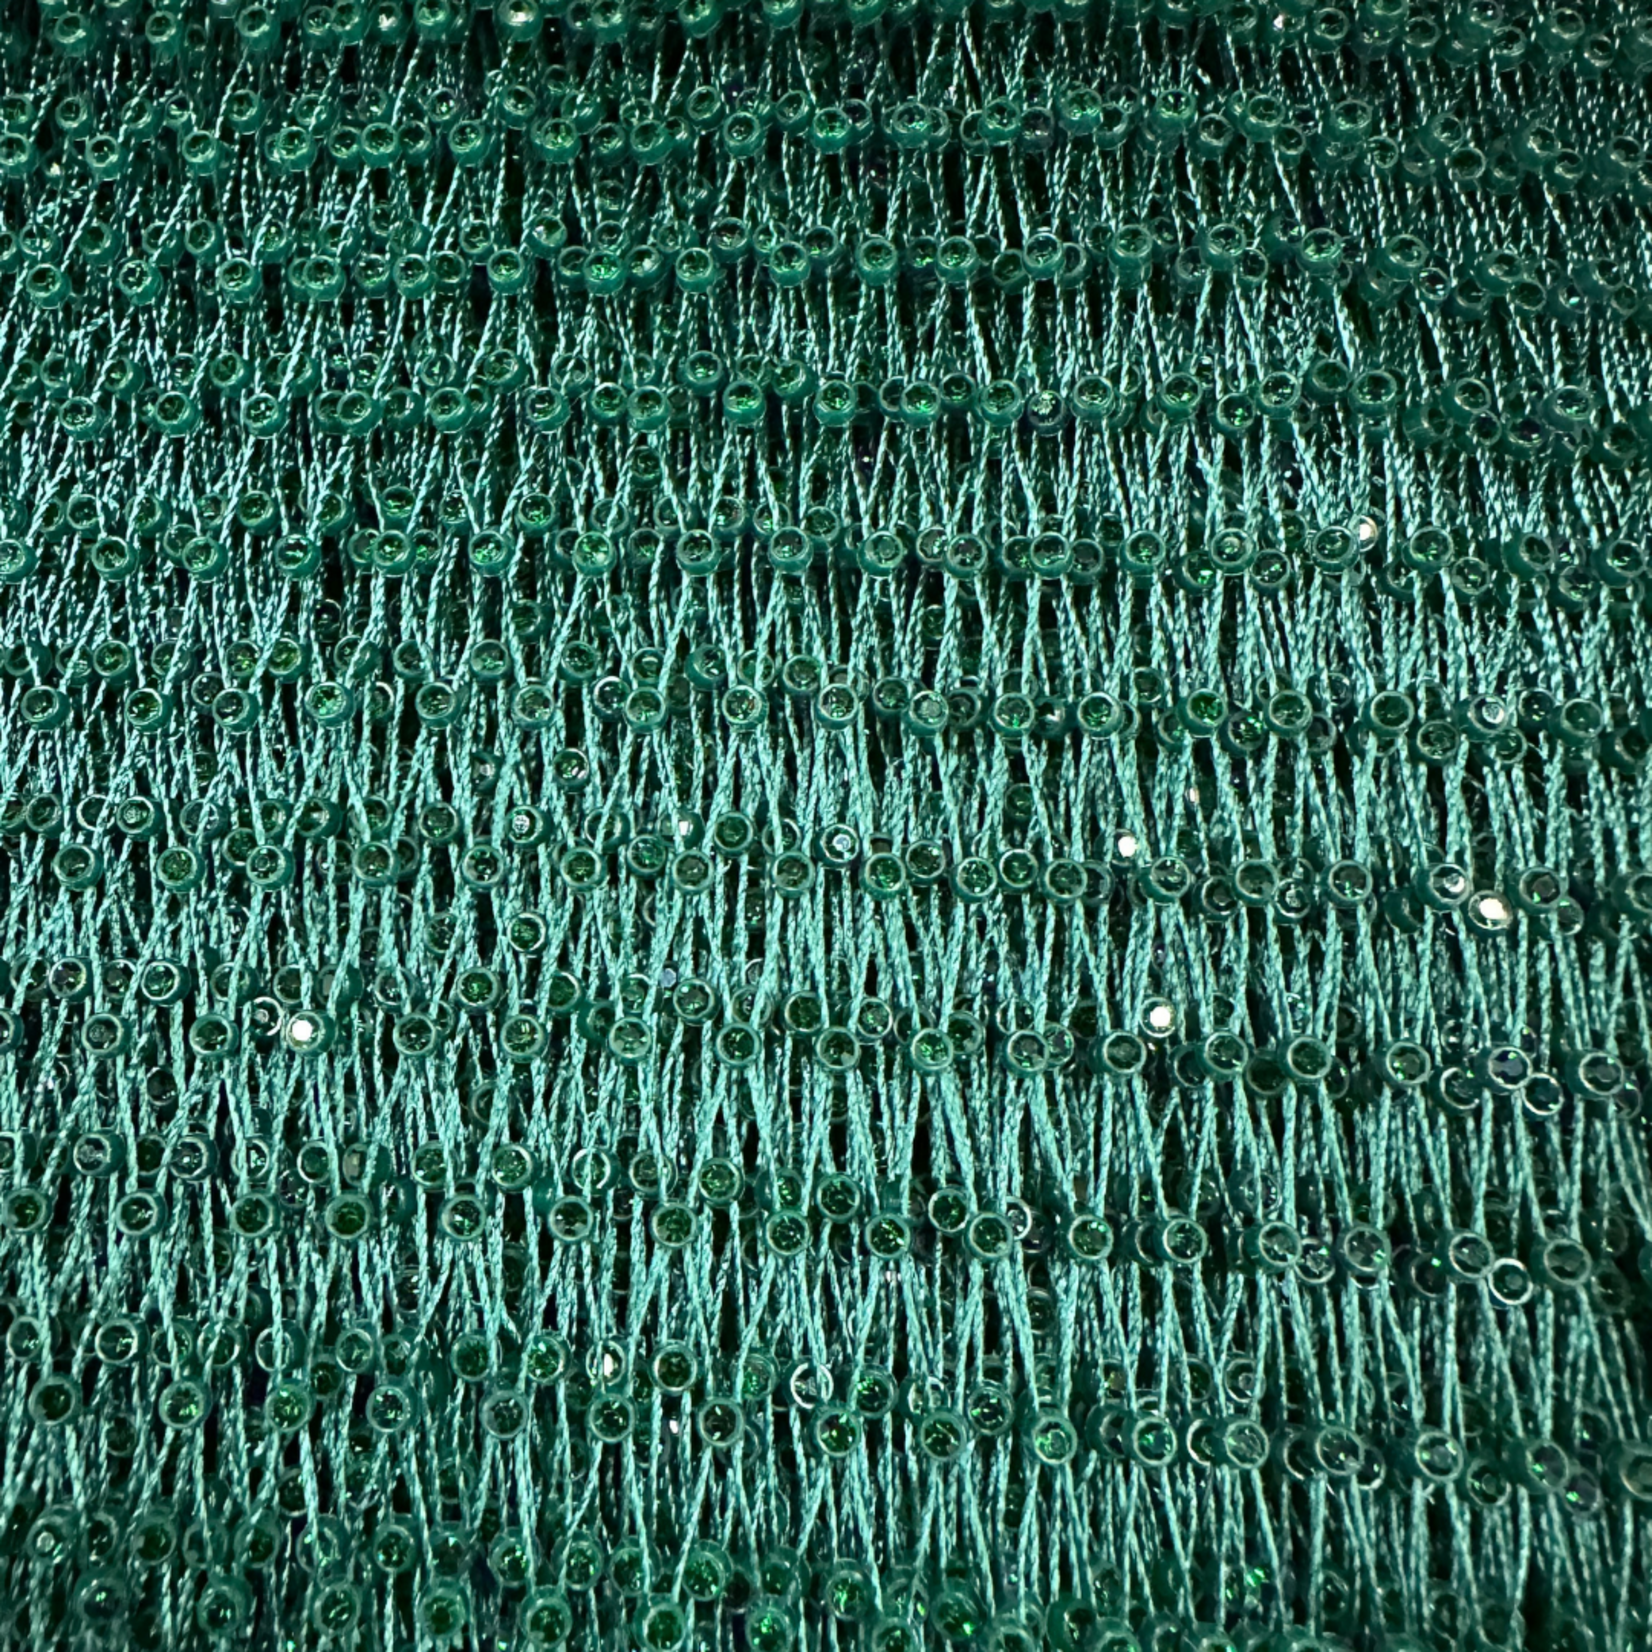 Polyester Spandex Mesh with AB Stones - Kelly Green